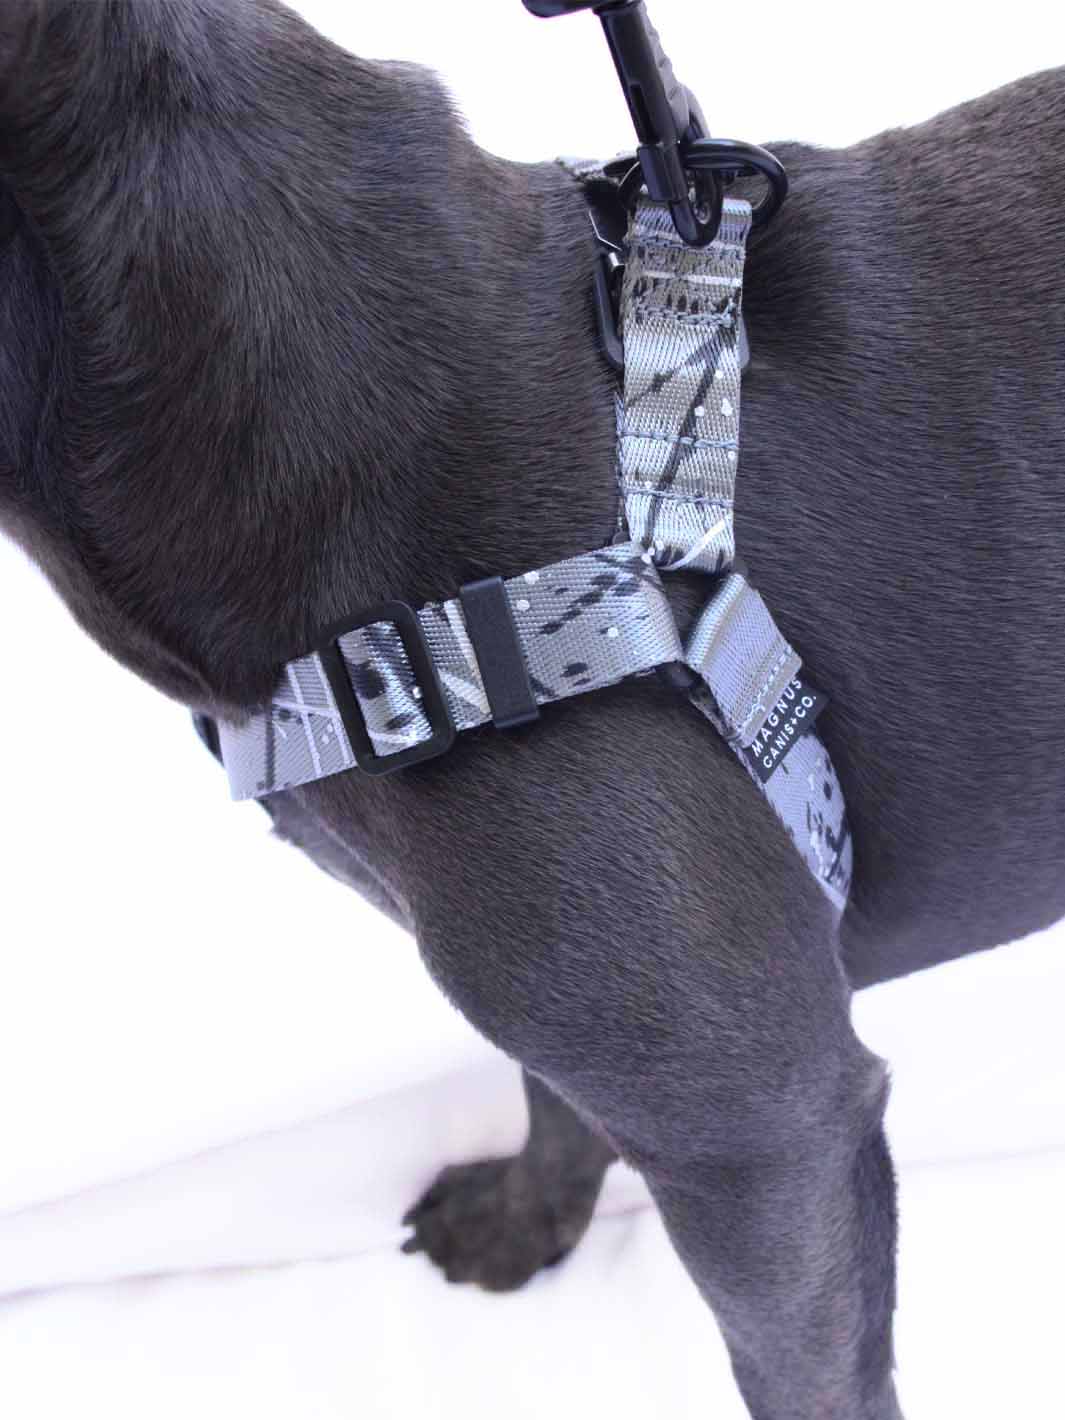 Hand painted strap harness with cute french bulldog in it.